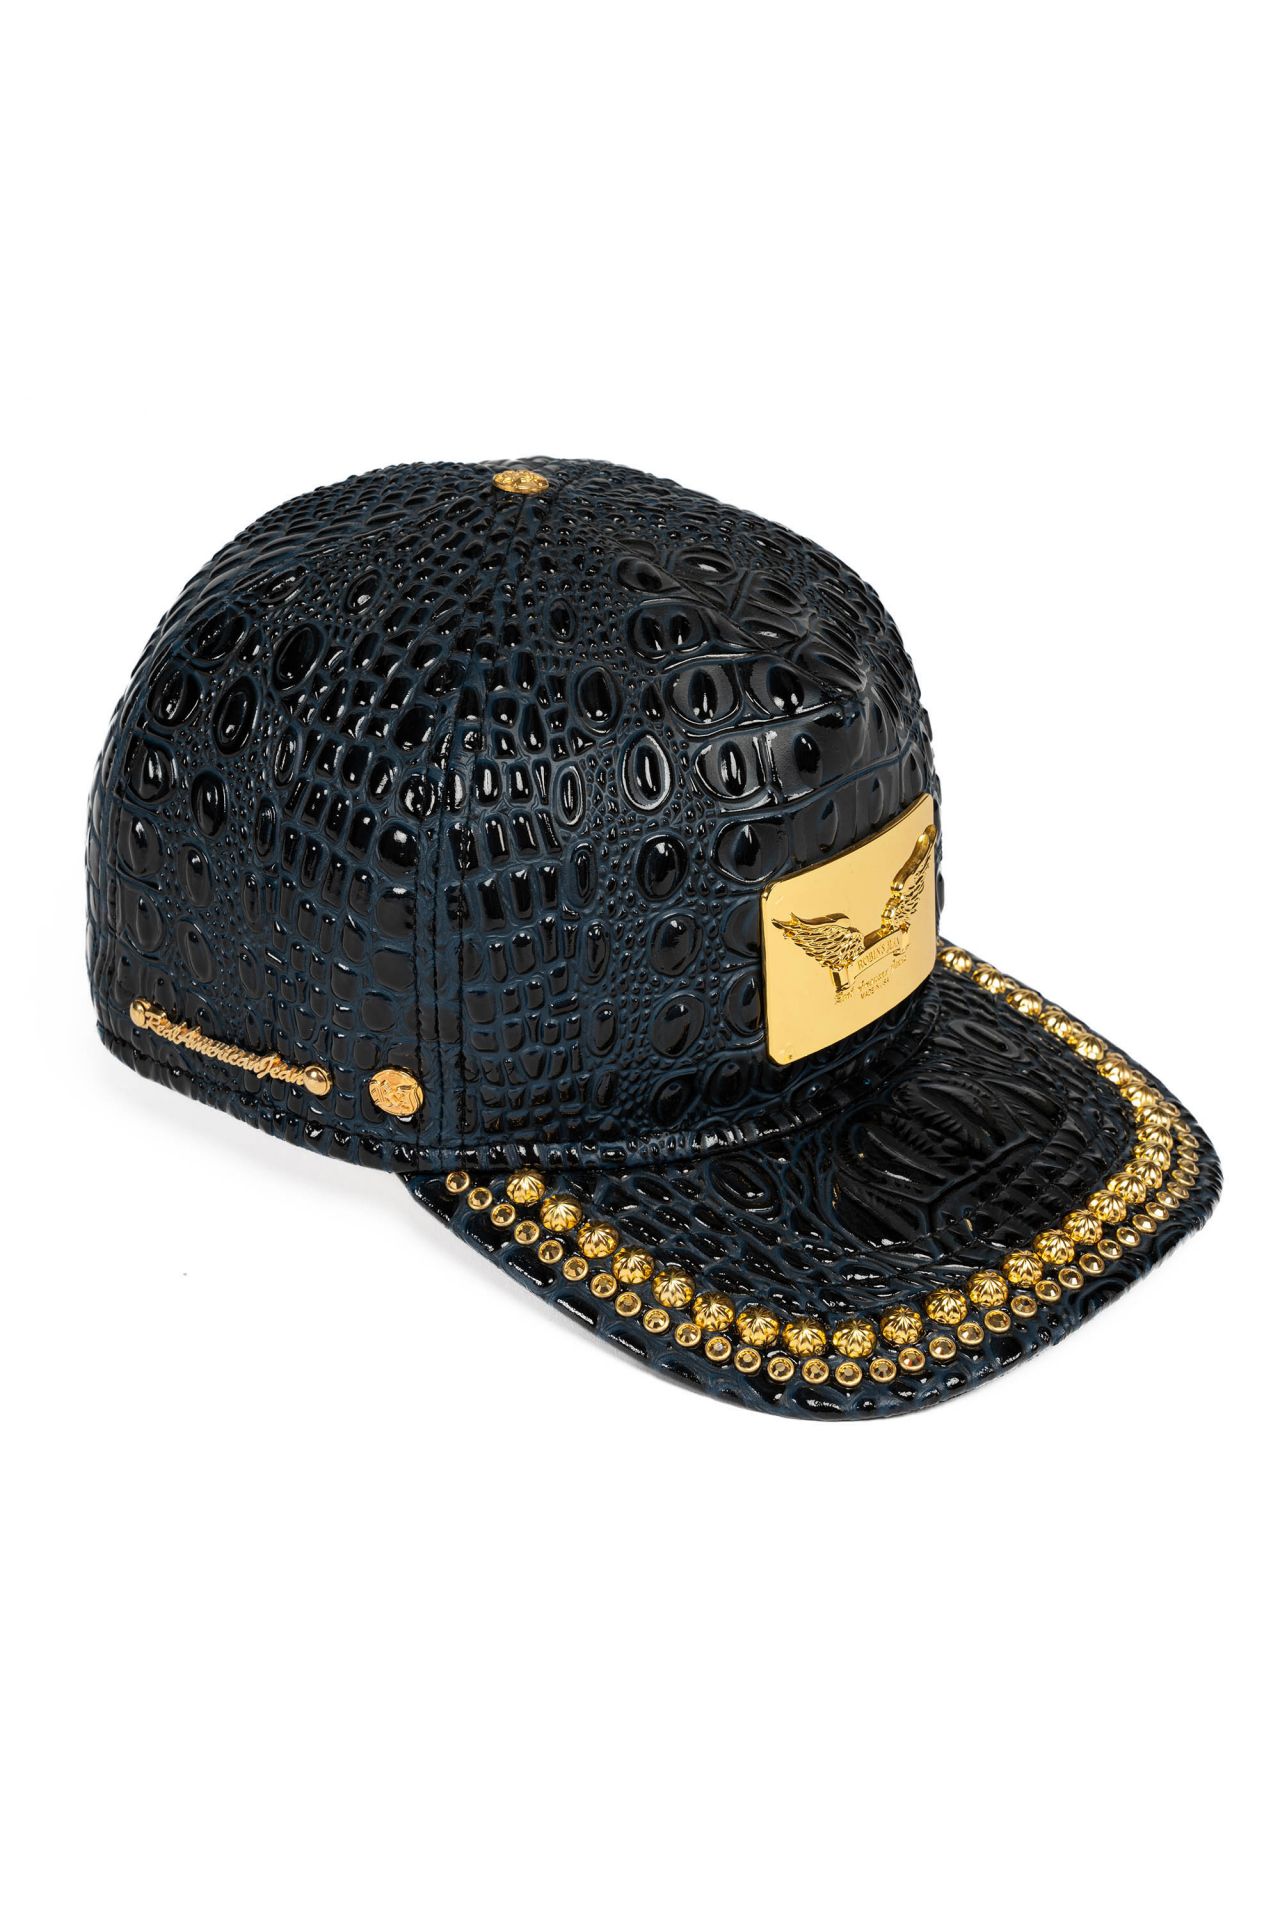 ROBIN'S GOLD TAG CAP IN NAVY CROC WITH STUDS AND CRYSTALS